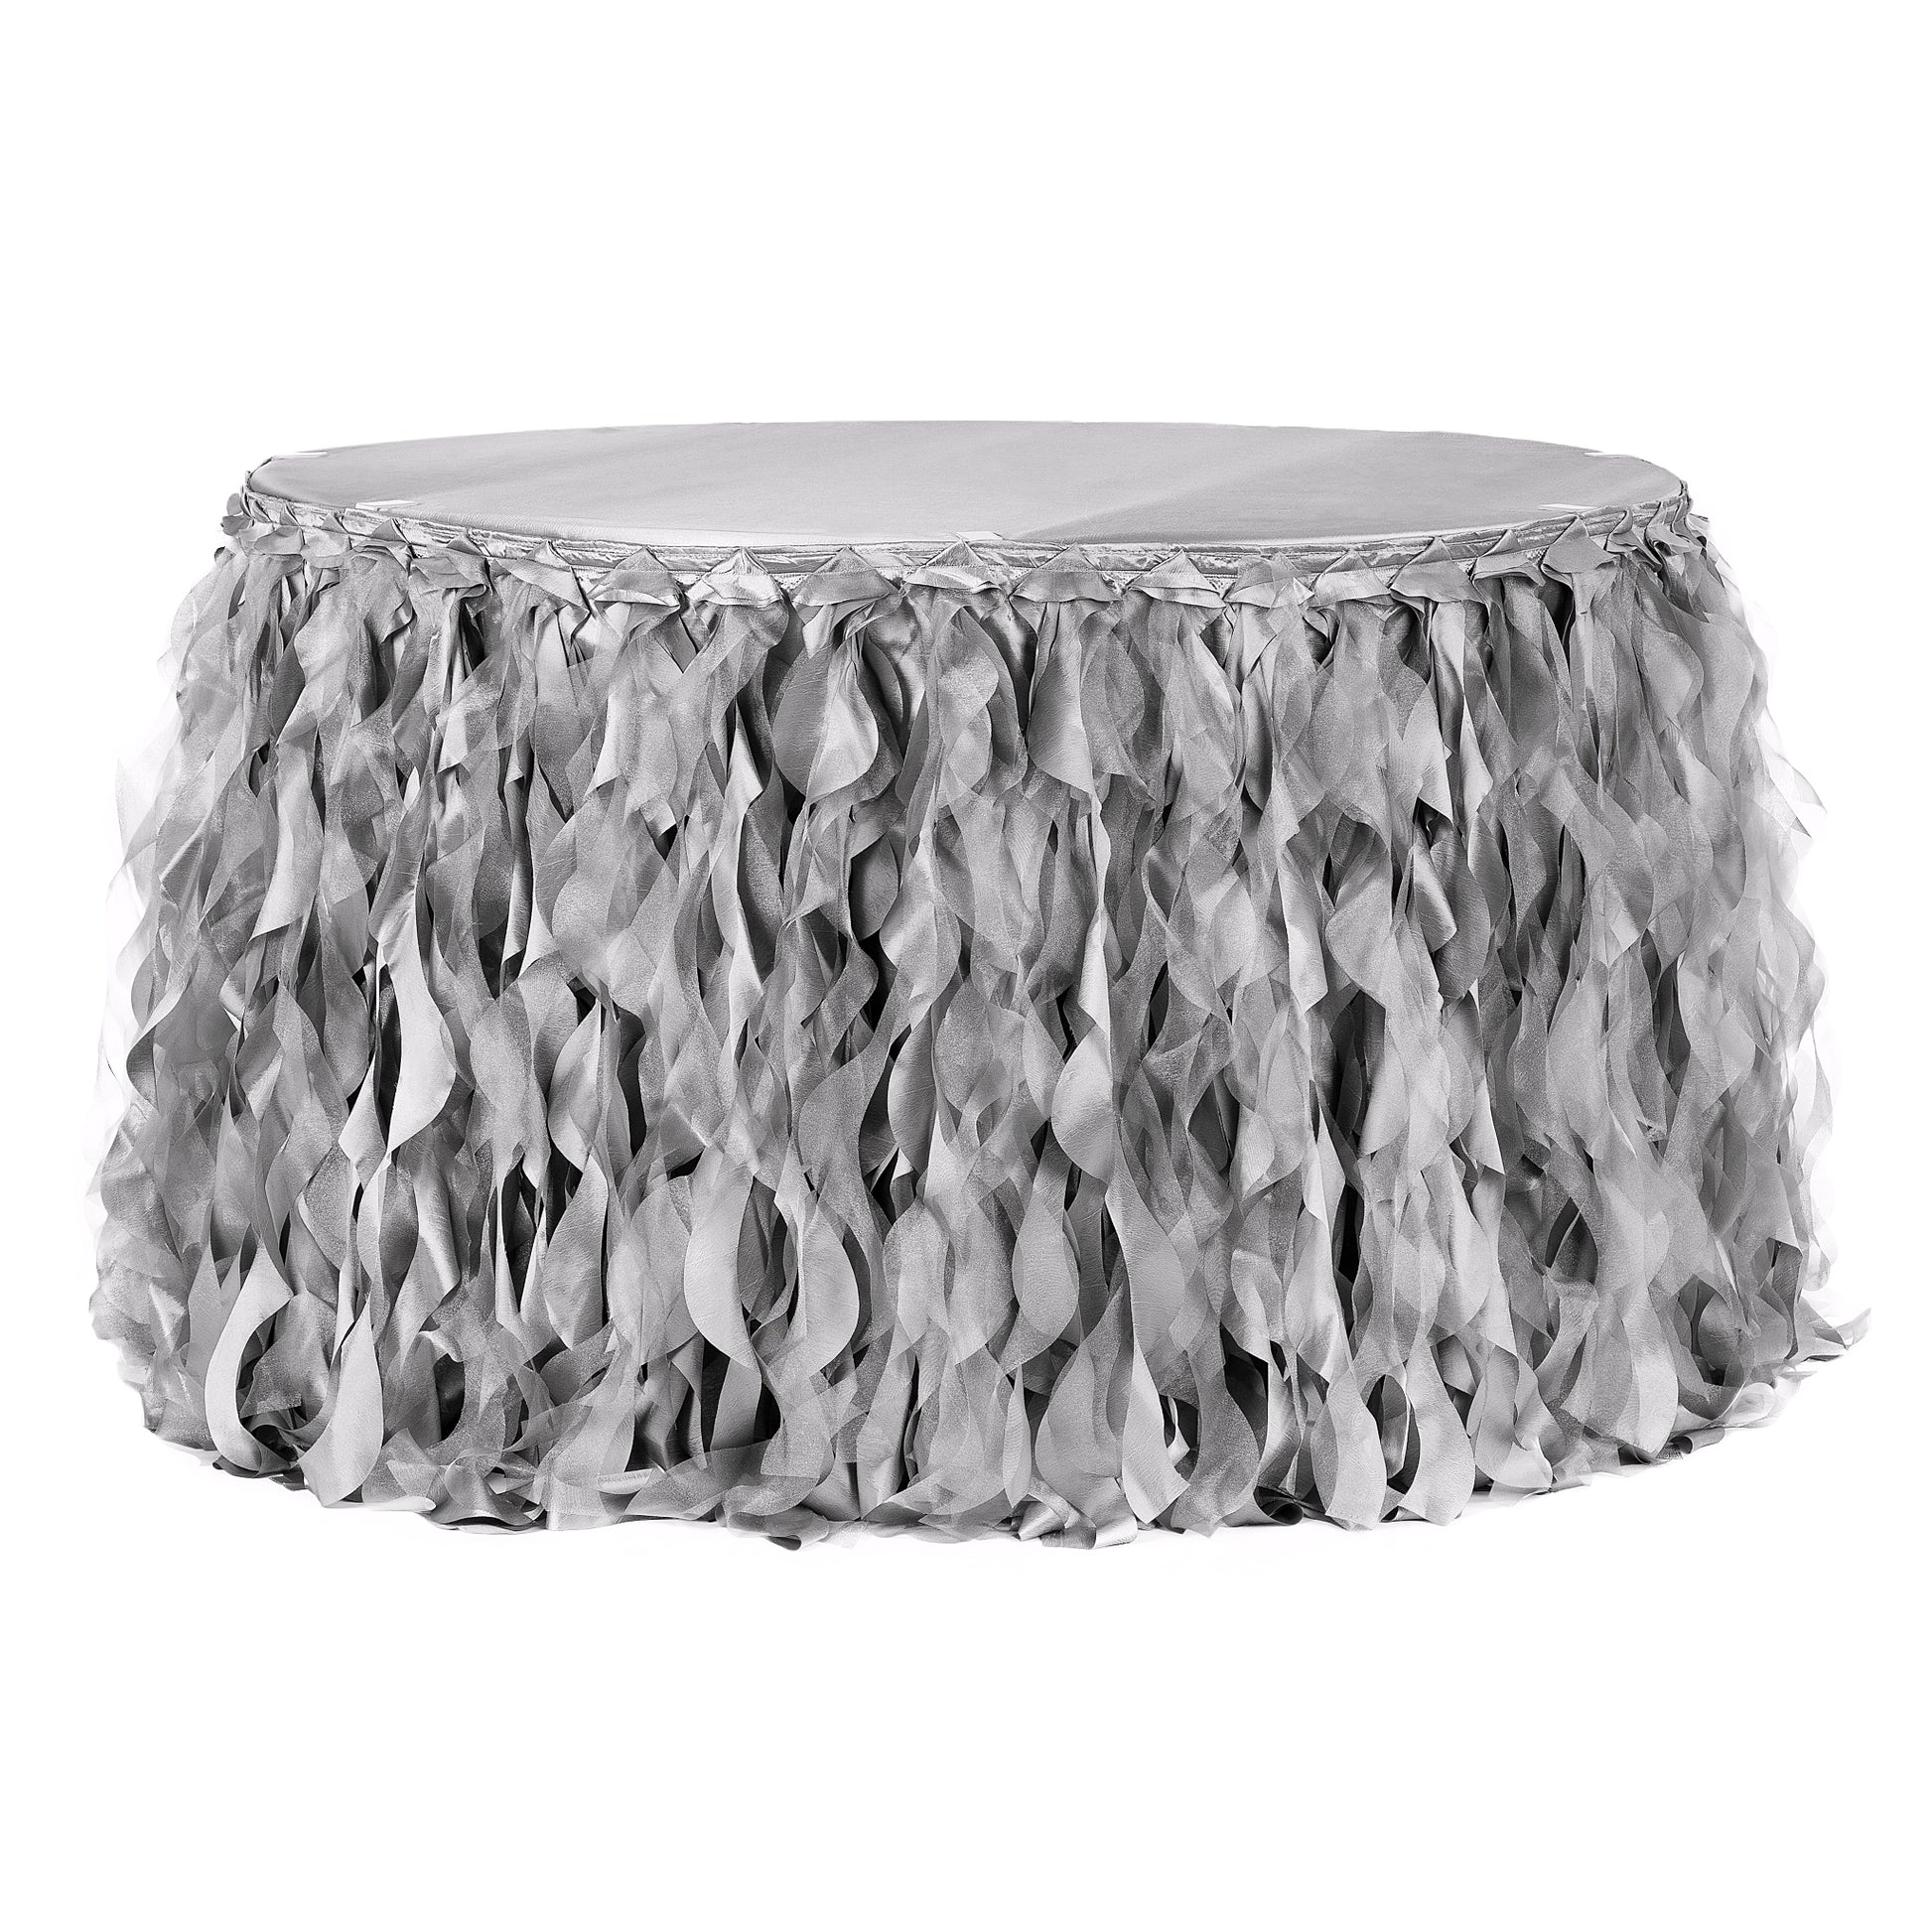 Curly Willow 17ft Table Skirt - Silver - CV Linens